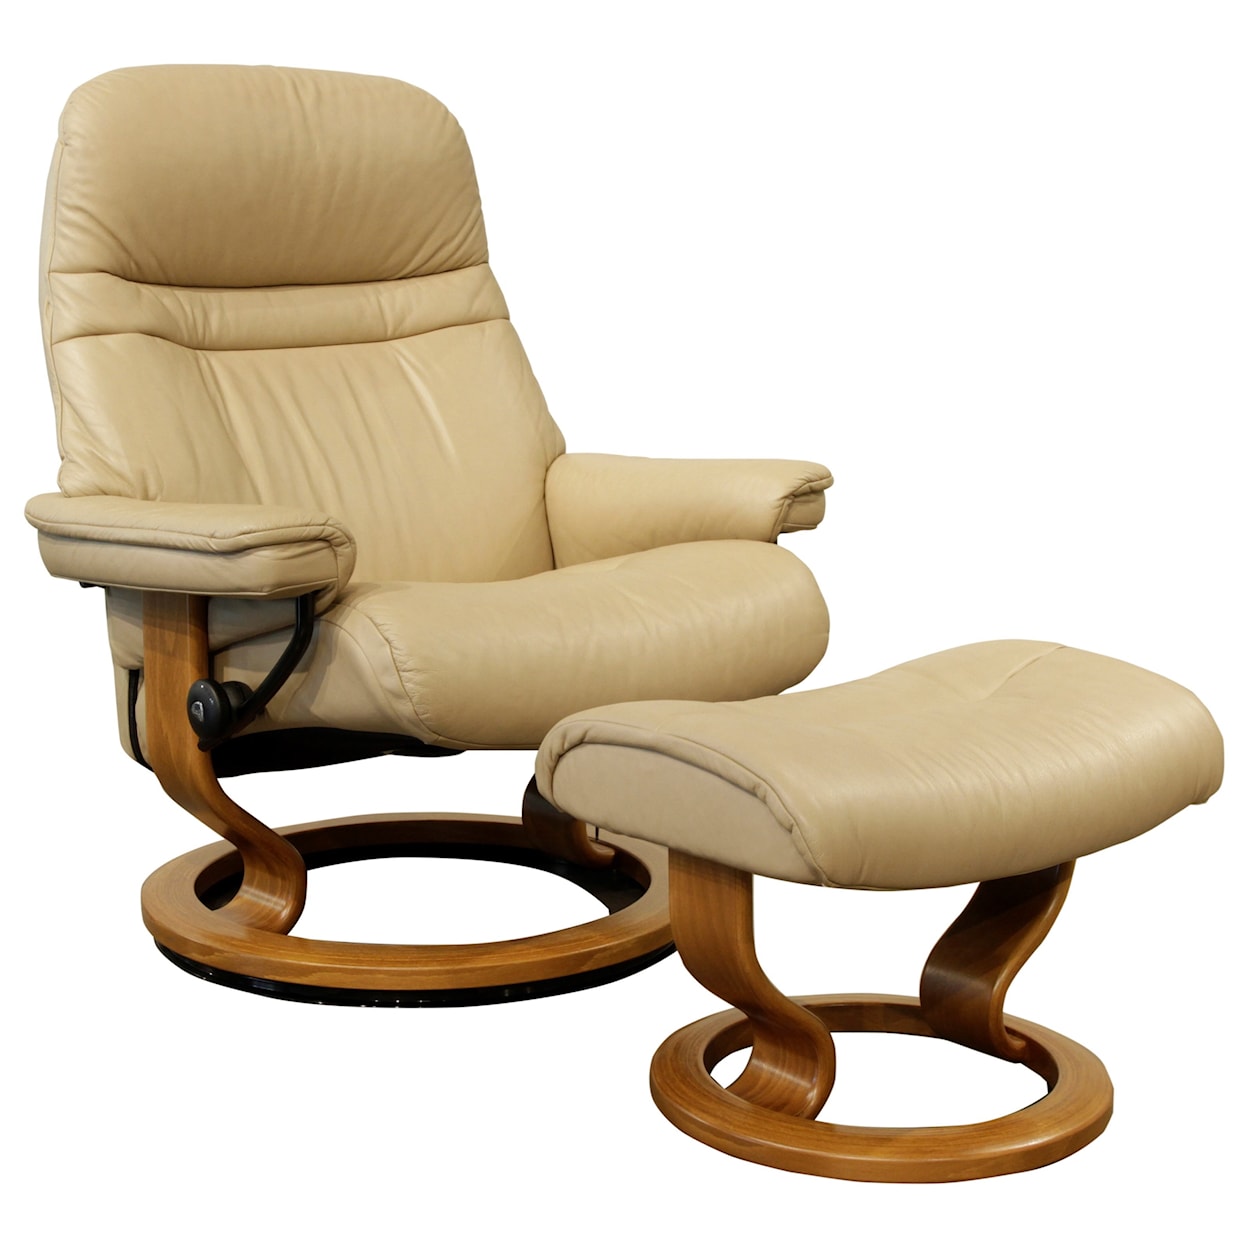 Stressless by Ekornes Sunrise Large Chair & Ottoman with Classic Base